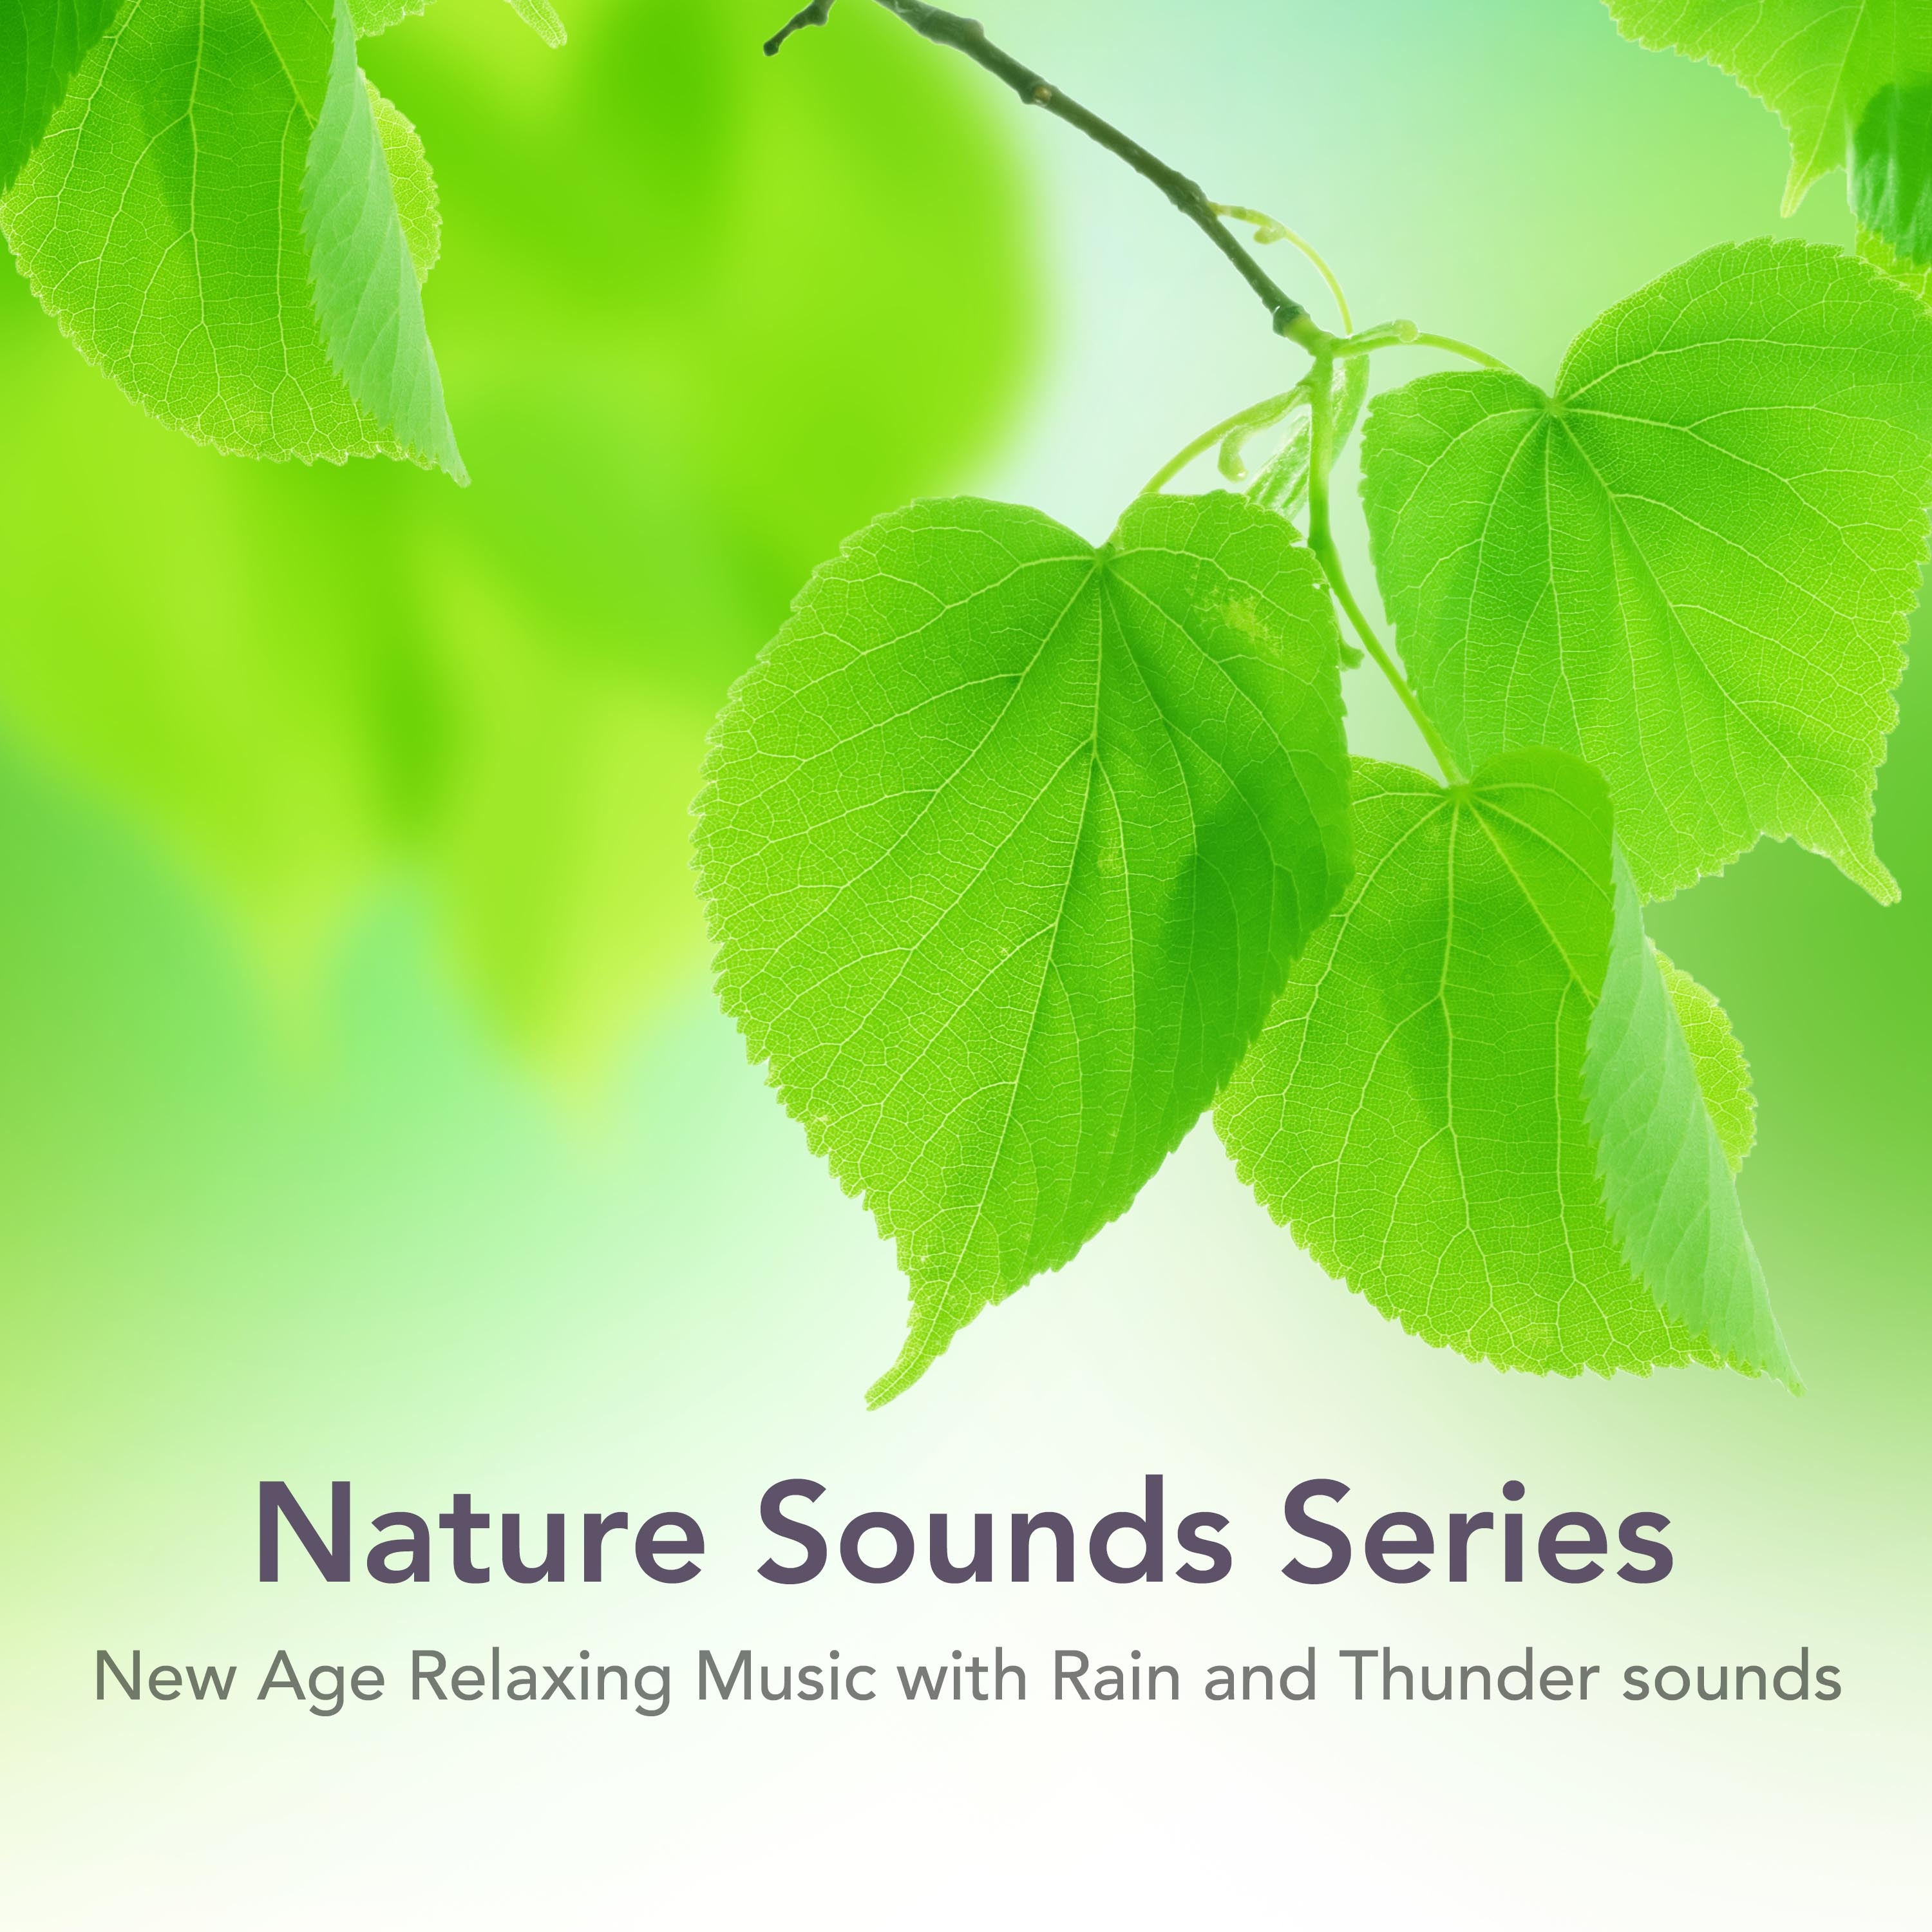 Nature Sounds Series - New Age Relaxing Music with Rain and Thunder sounds, Ocean Waves, Wind, Chimes, Tibetan Bells, Rivers, Forest